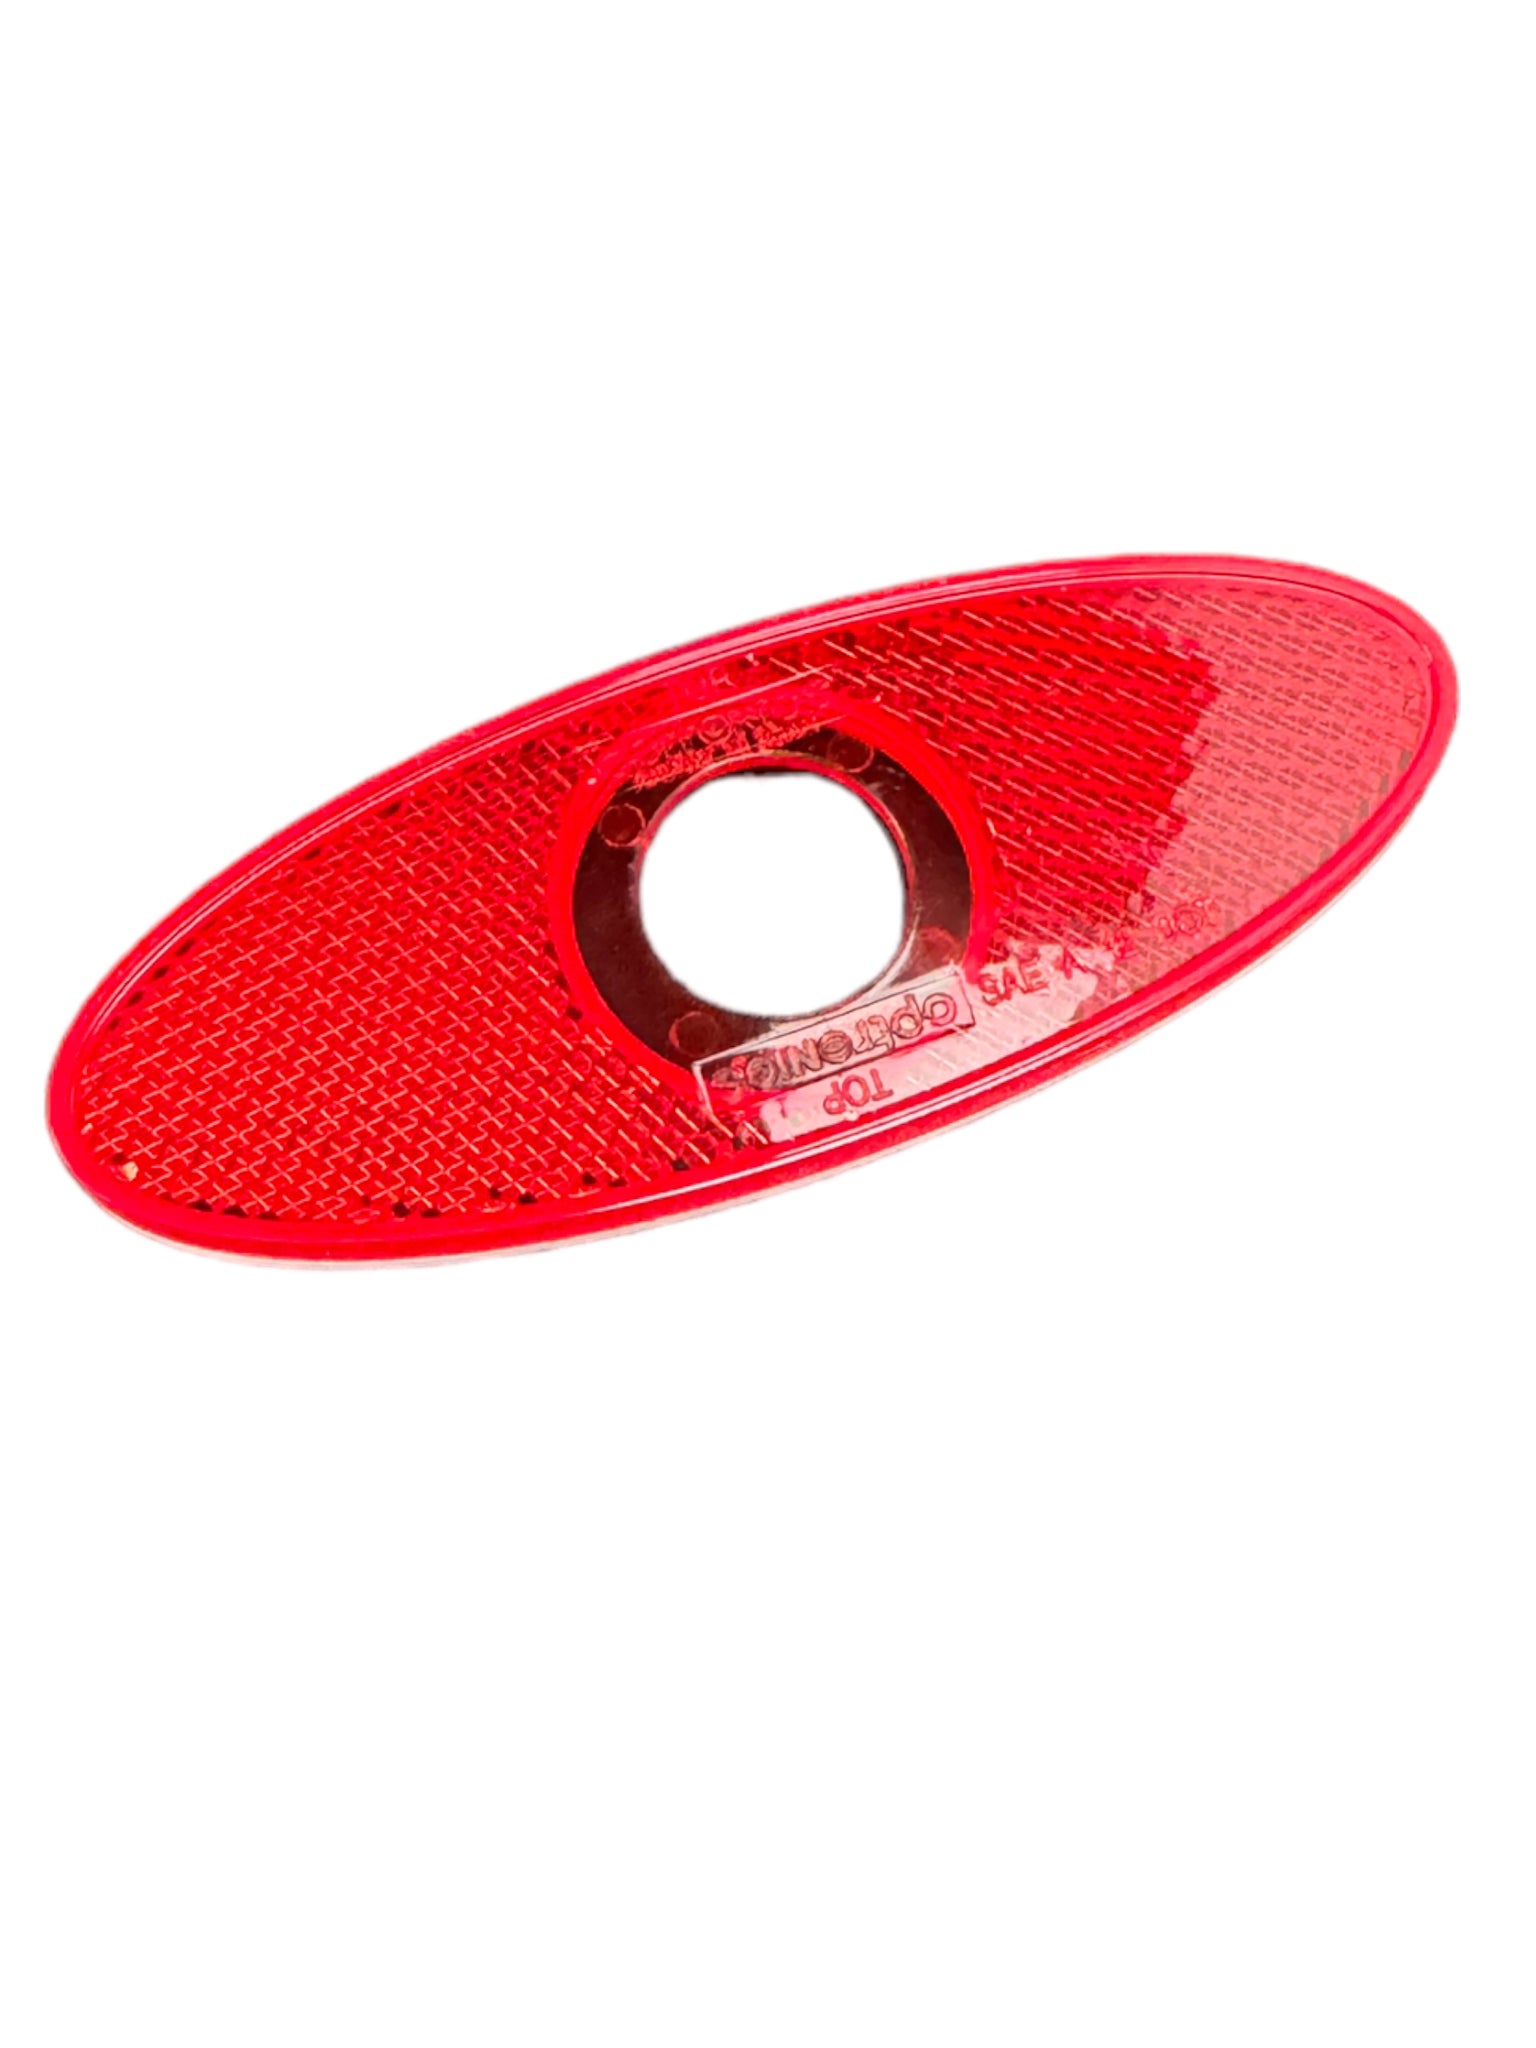 REFLECTOR RED OVAL